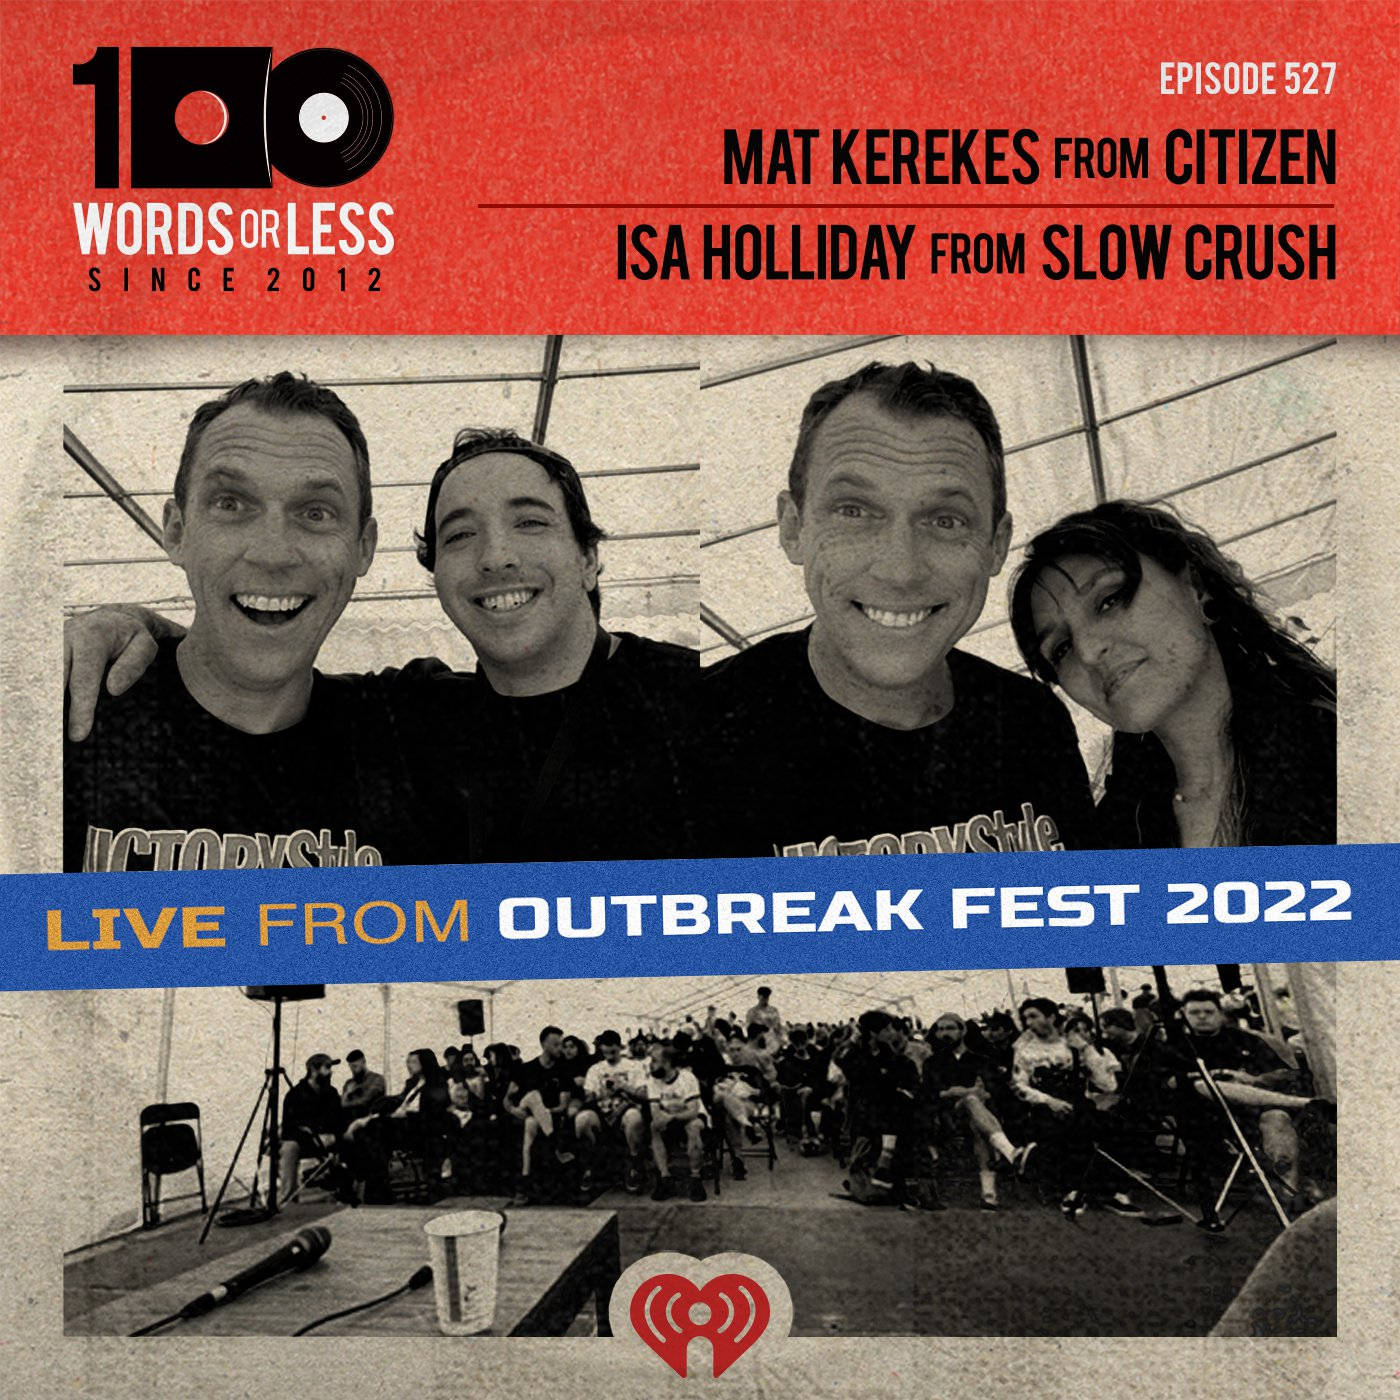 Mat Kerekes from Citizen & Isa Holliday from Slow Crush - Live from Outbreak